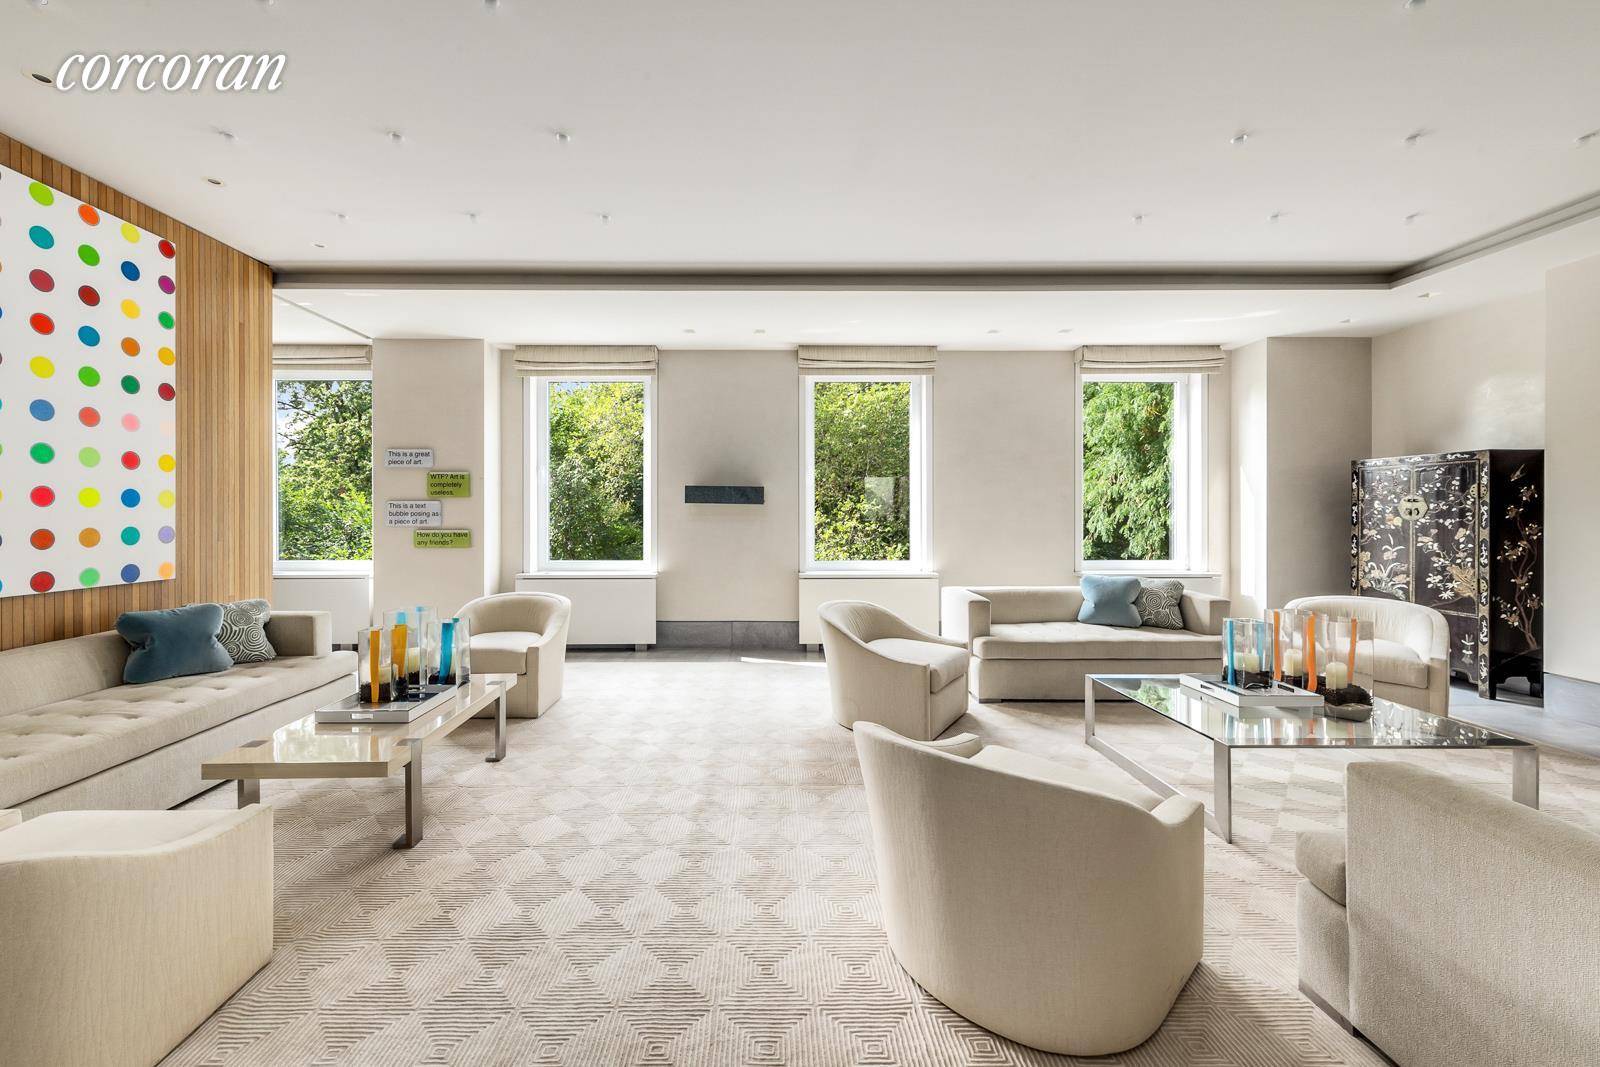 944 Fifth Avenue ? s 3rd Floor Residence is thoughtfully designed by Leroy Street Studios, and is an exceptional full floor home located in one of Manhattan ?